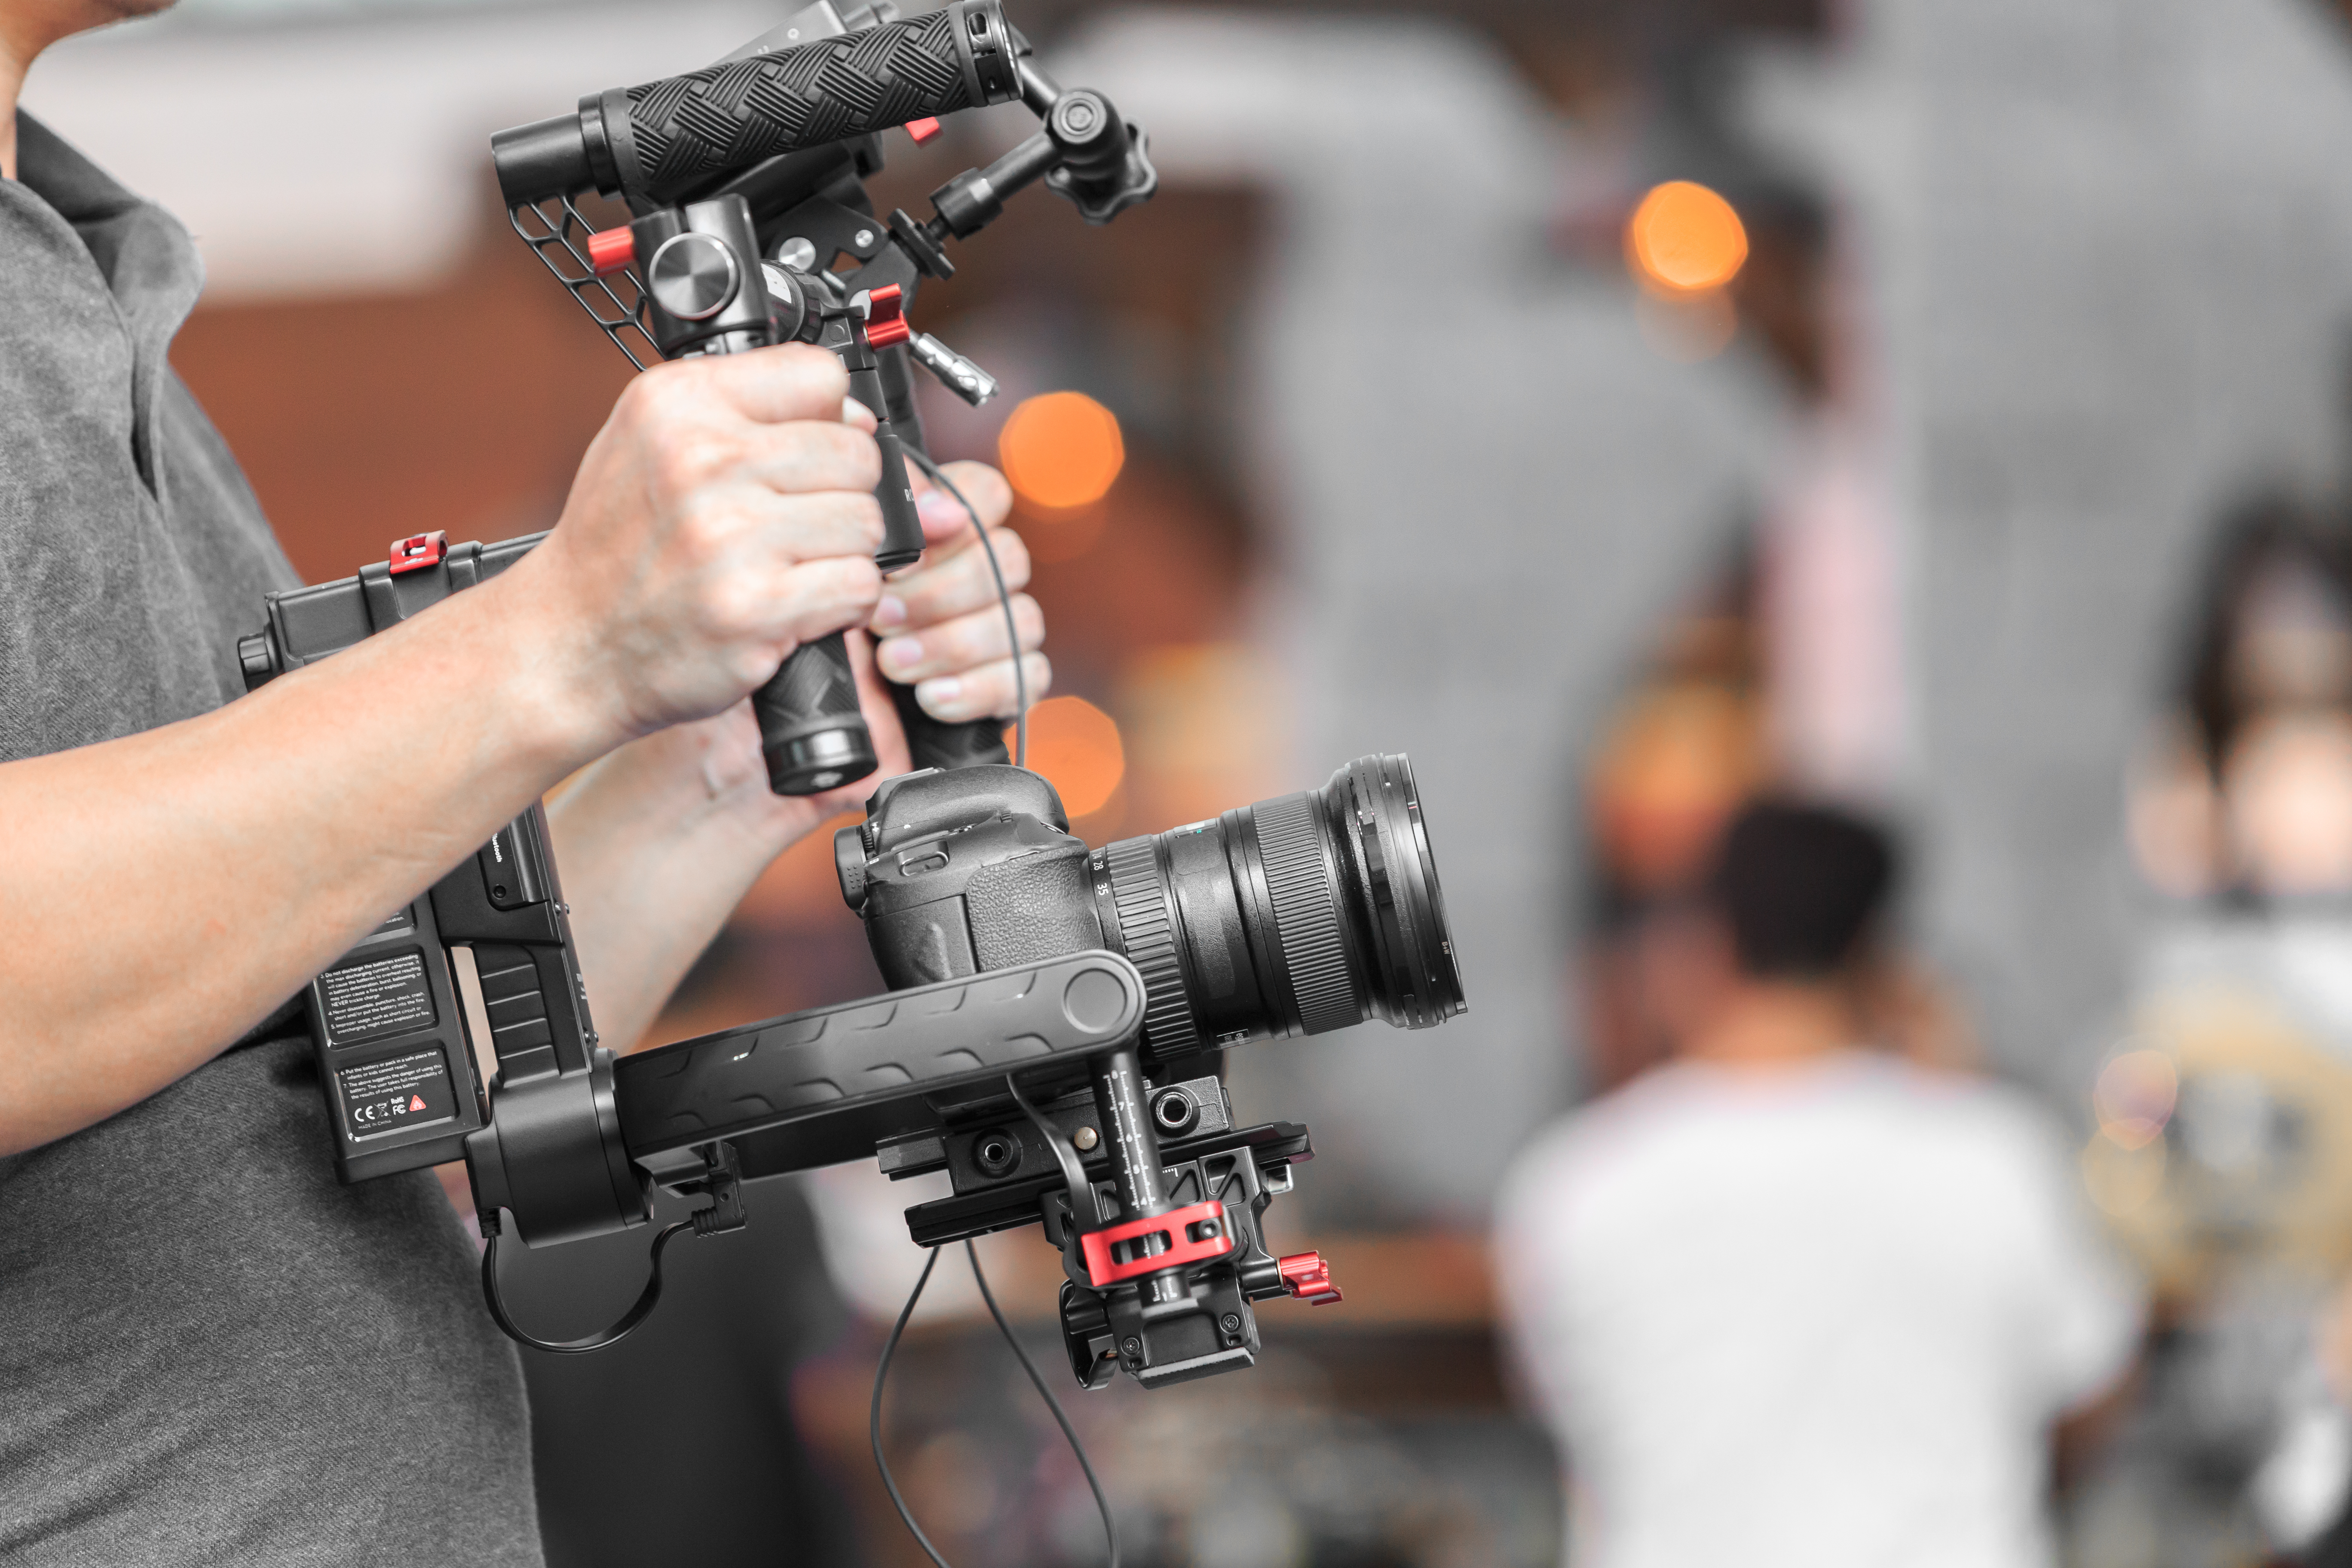 5 Reasons to Add Video Content to Your Marketing Mix